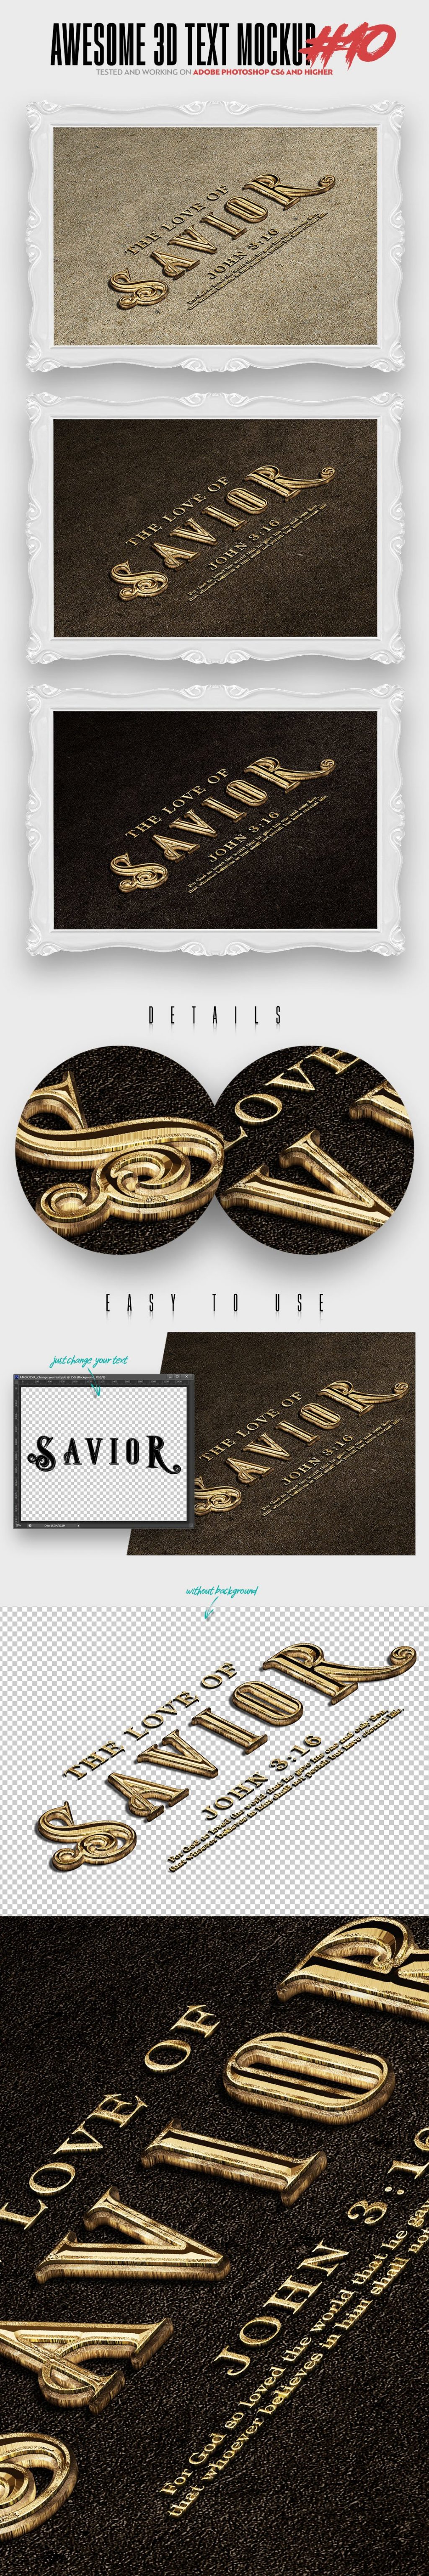 Download 20 Best 3D Text Mockup Templates. Awesome Bundle - $19 ...